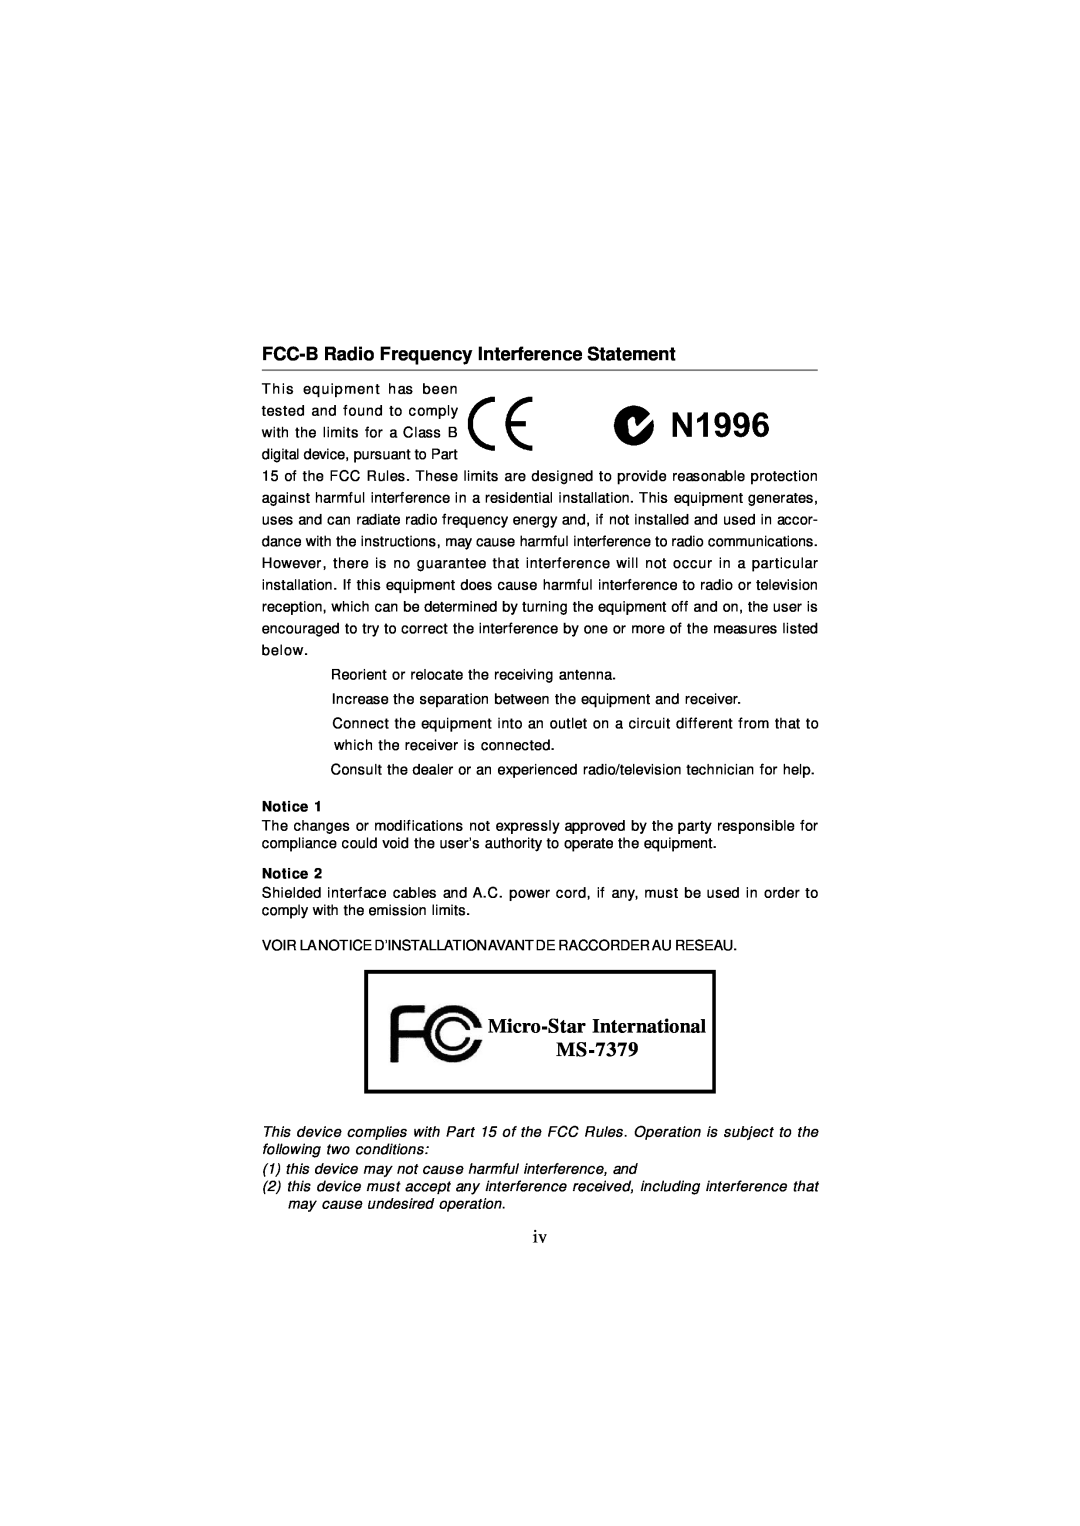 Micro Star  Computer G31M manual FCC-B Radio Frequency Interference Statement, Micro-Star International MS-7379 